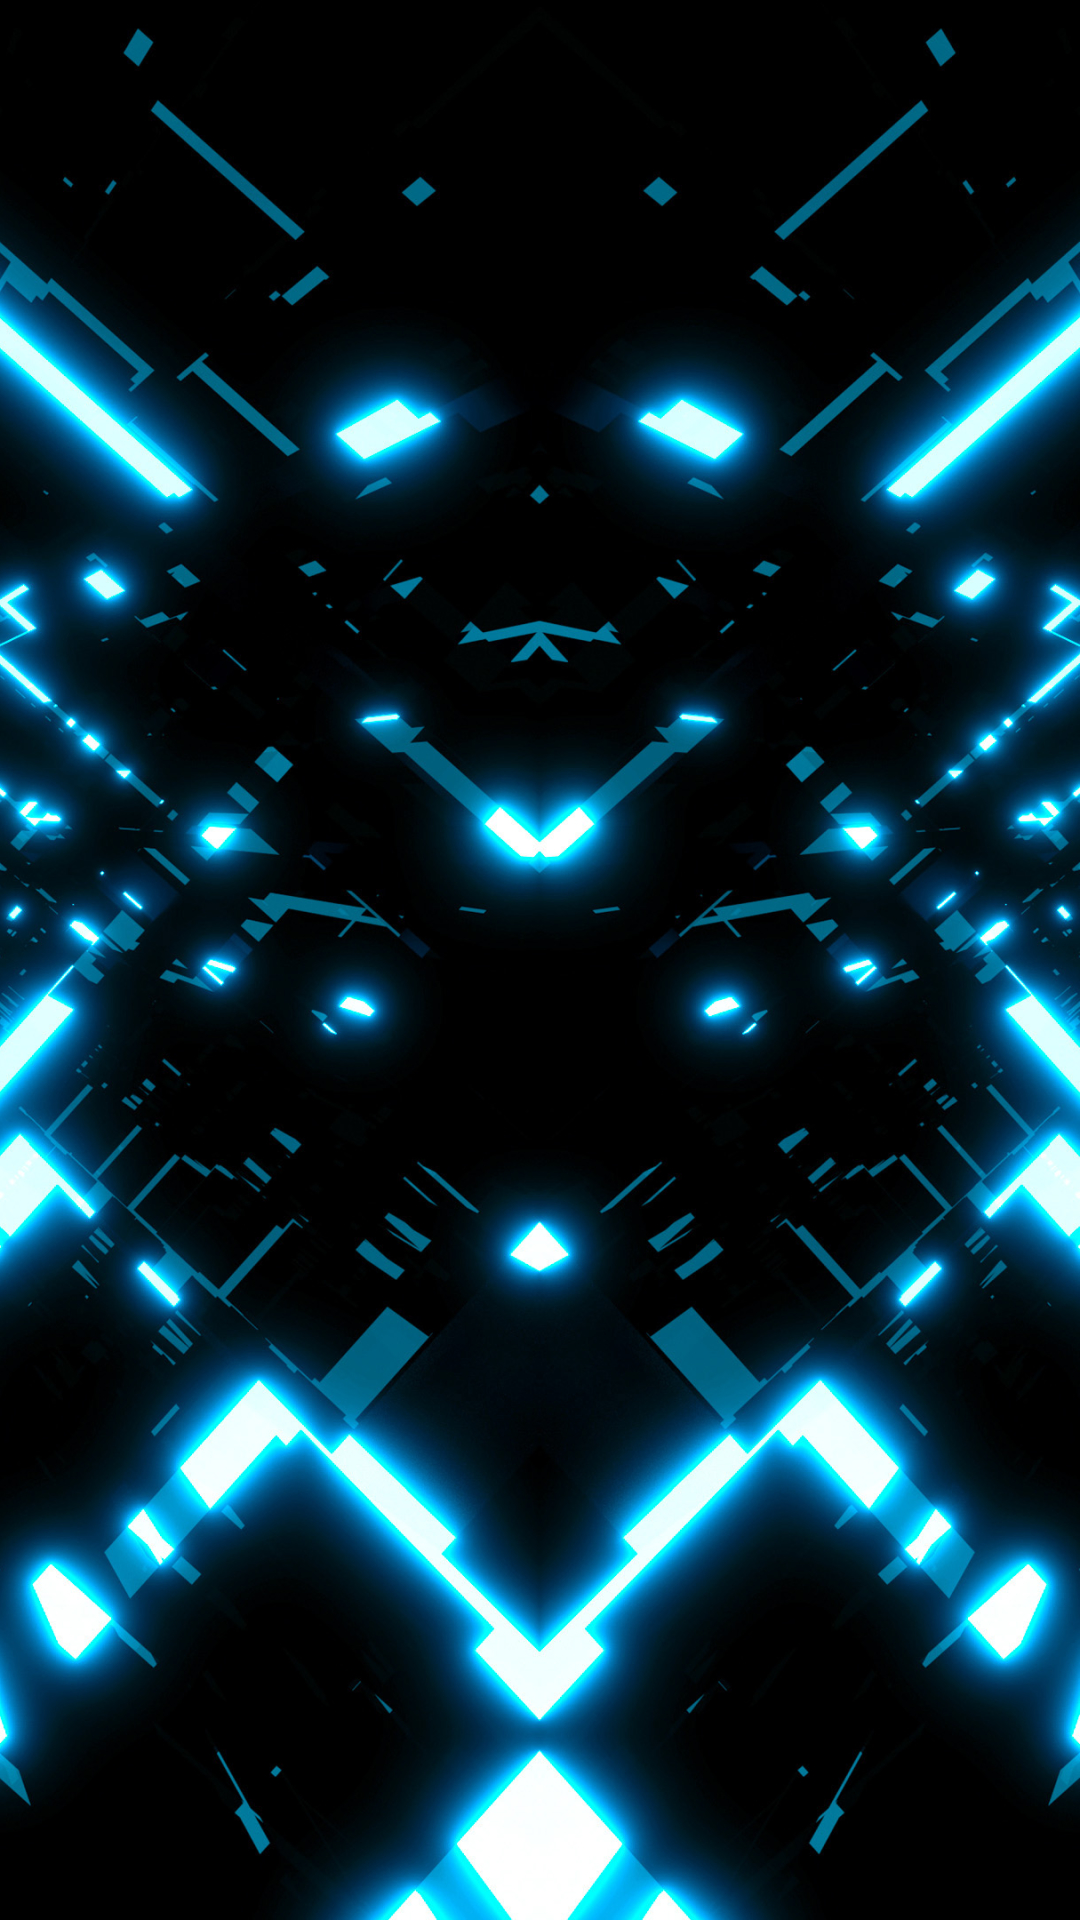 Tron Tunnels by Dr-Pen